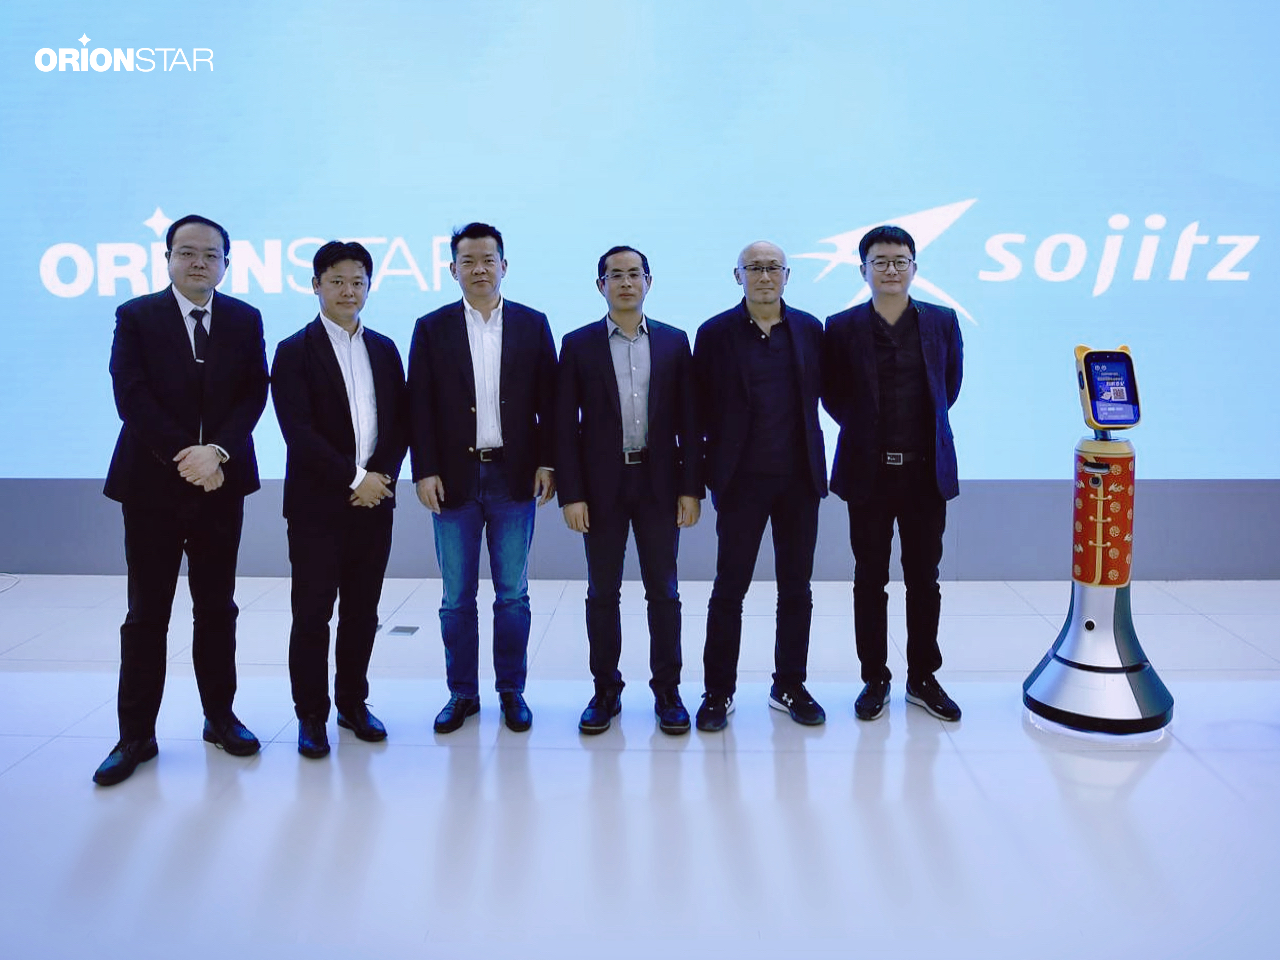 OrionStar Robotics and Sojitz Corporation Signed Distribution Agreement for Market in Japan